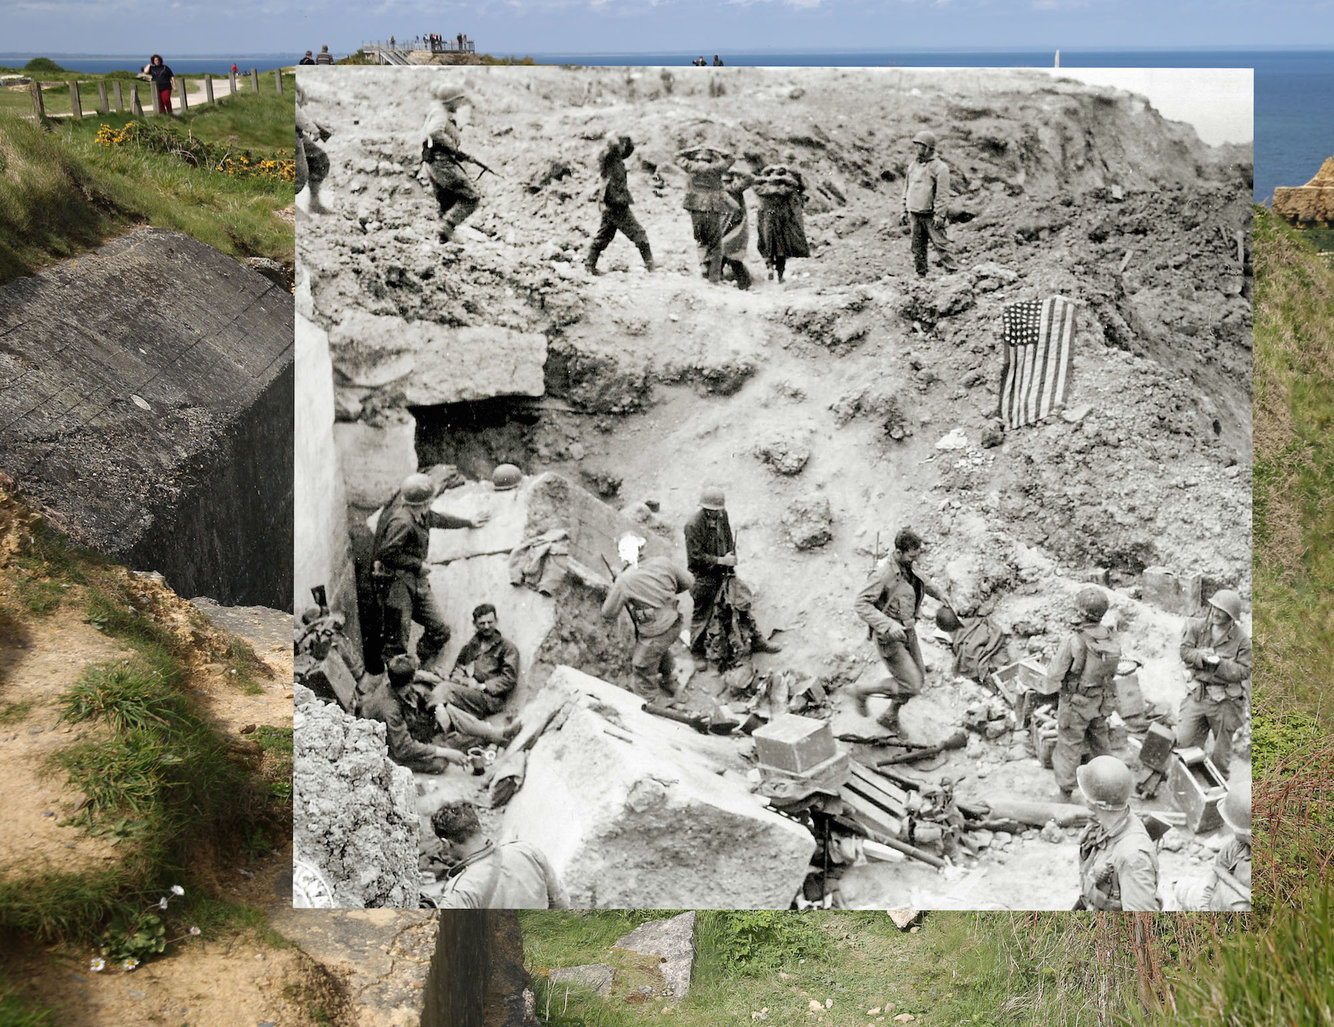 The cliffs on May 6, 2014, in Pointe du Hoc, France, where German prisoners were gathered as an American flag was deployed for signaling on Omaha Beach.